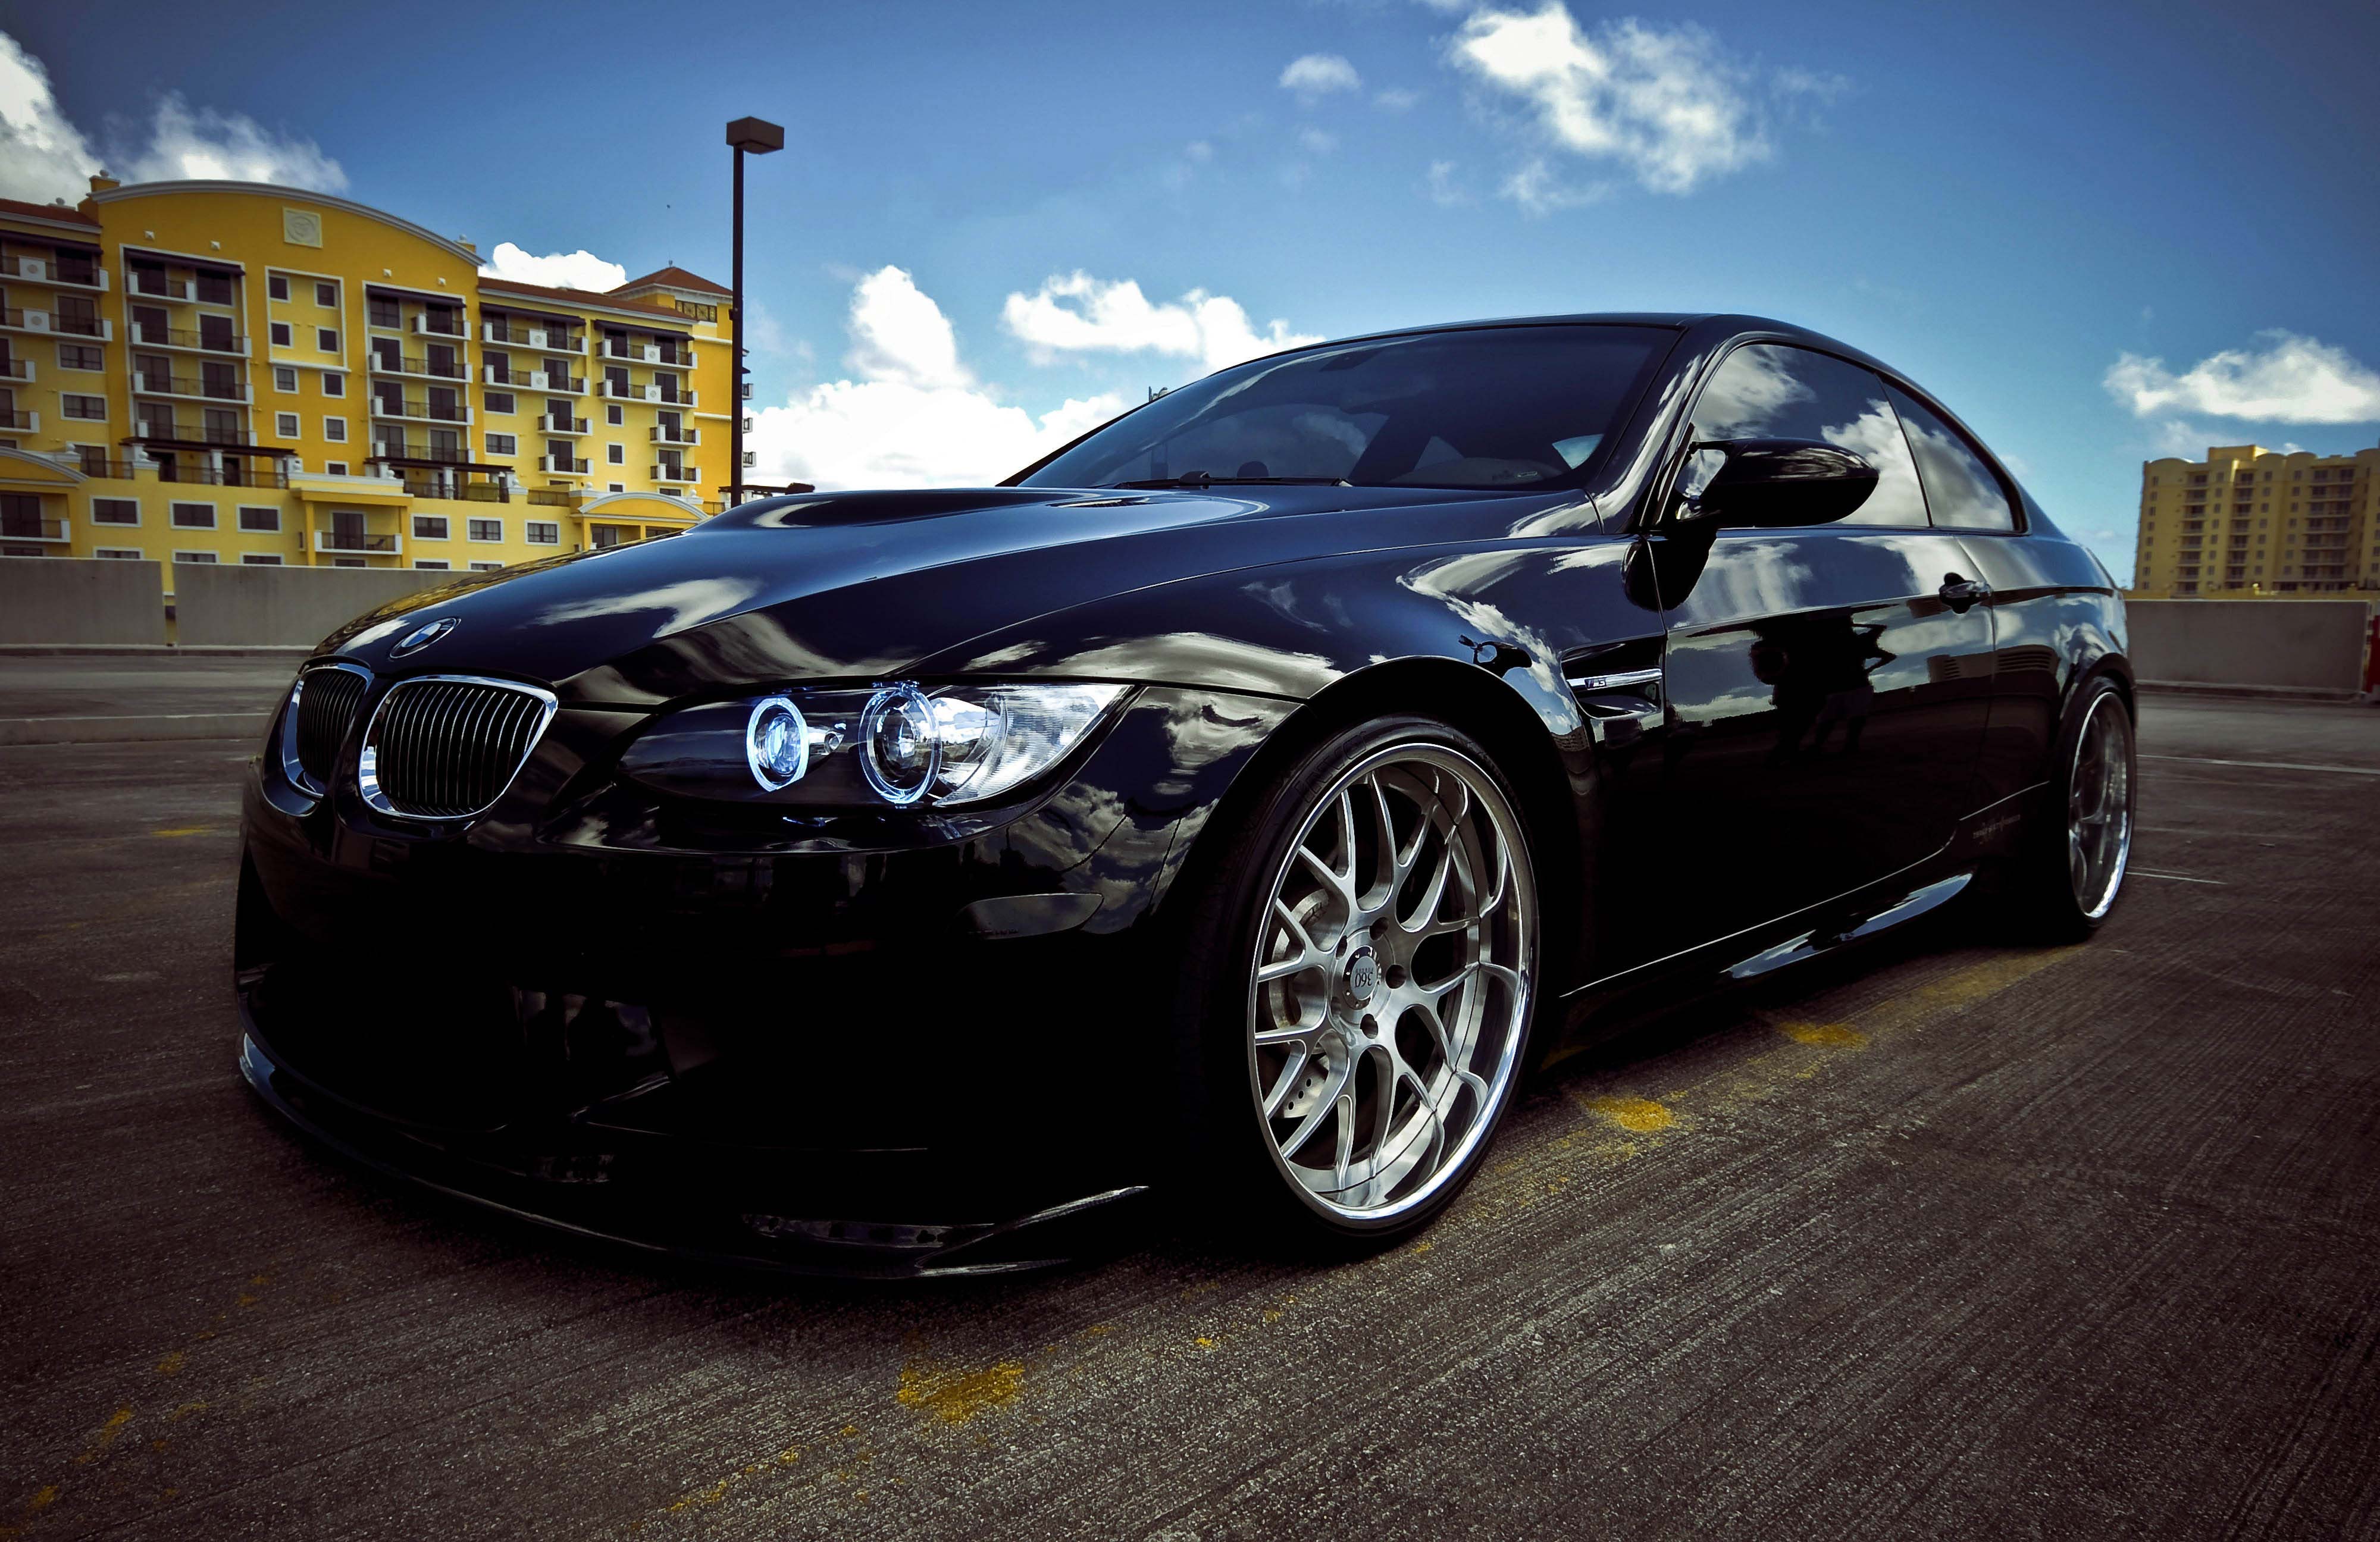 51 4k Bmw Wallpapers Hd 4k 5k For Pc And Mobile Download Free Images For Iphone Android